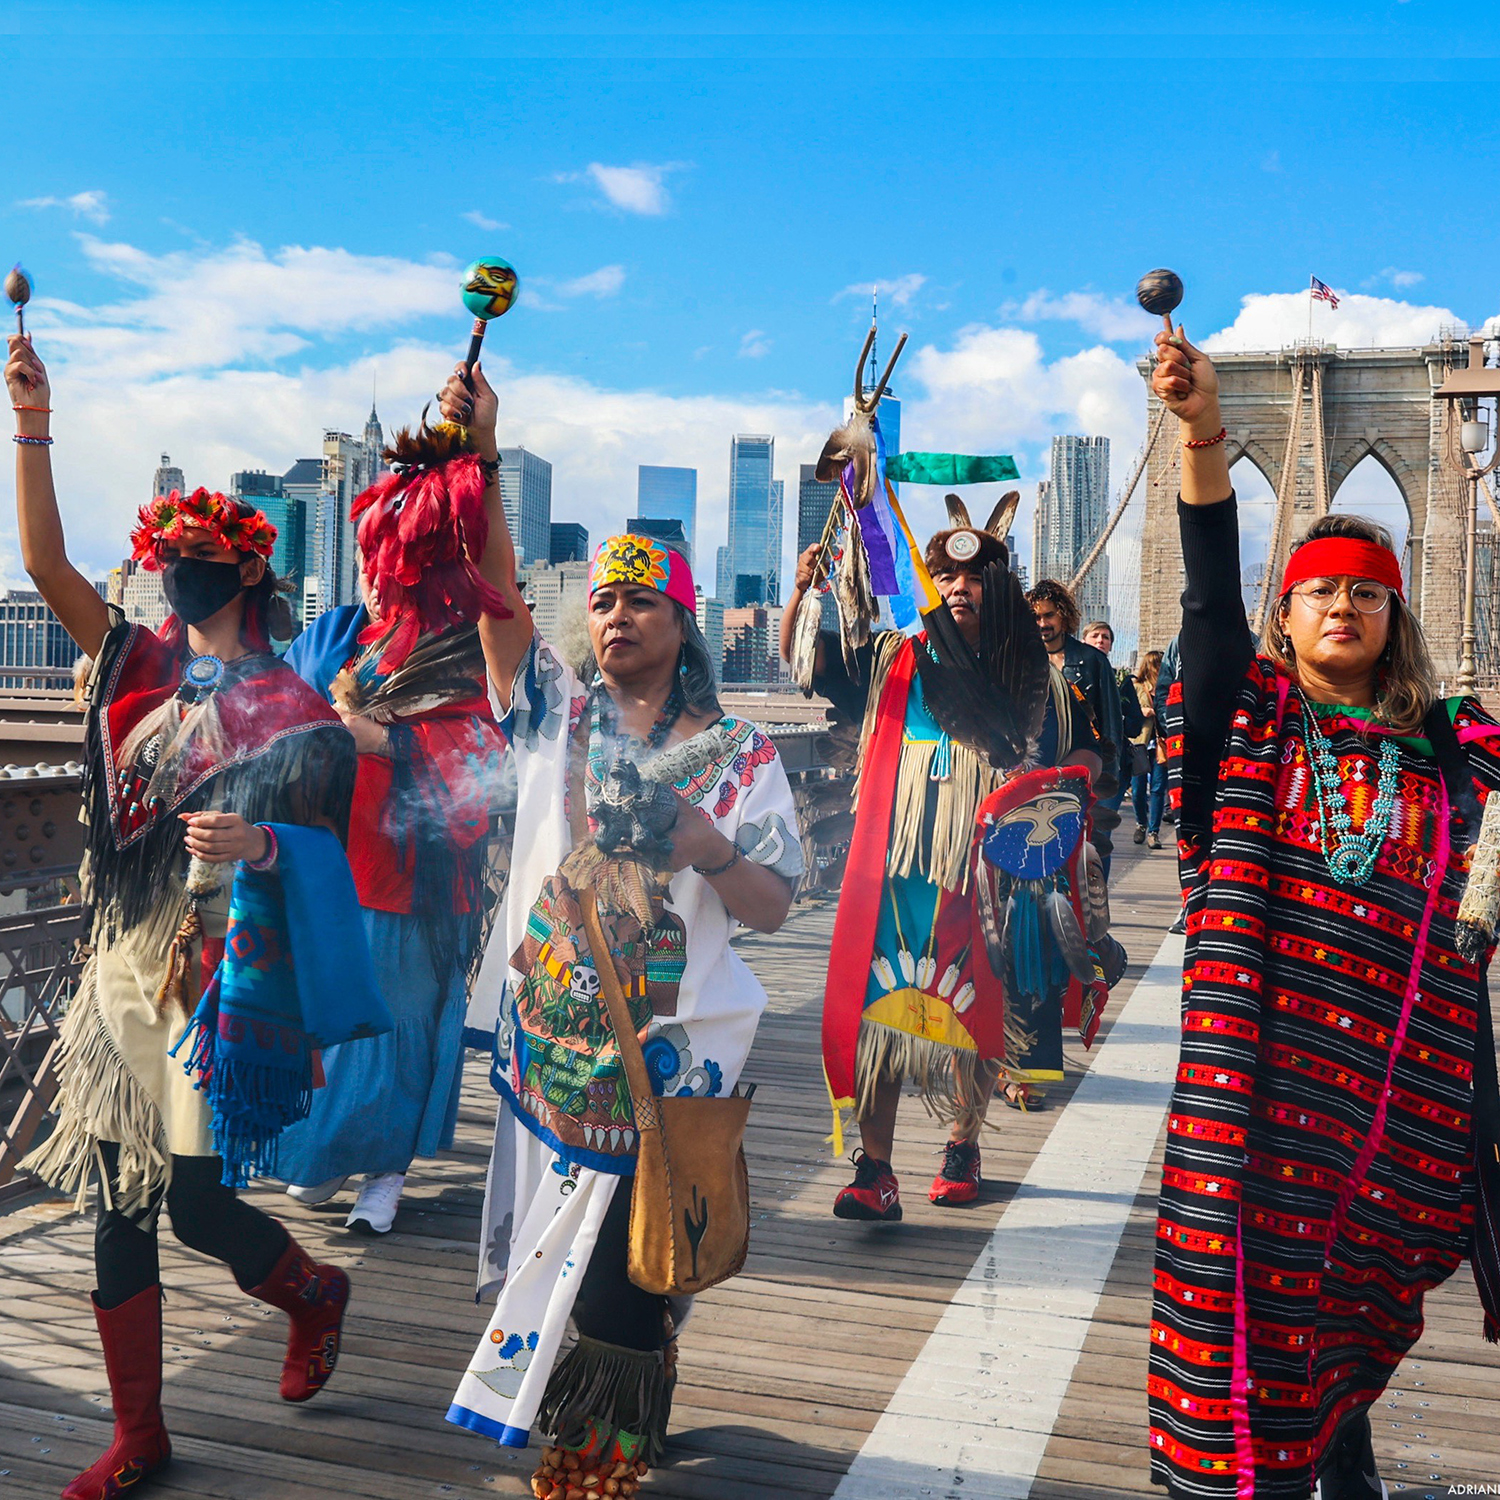 A group of people in native attire march across a bridge in New York